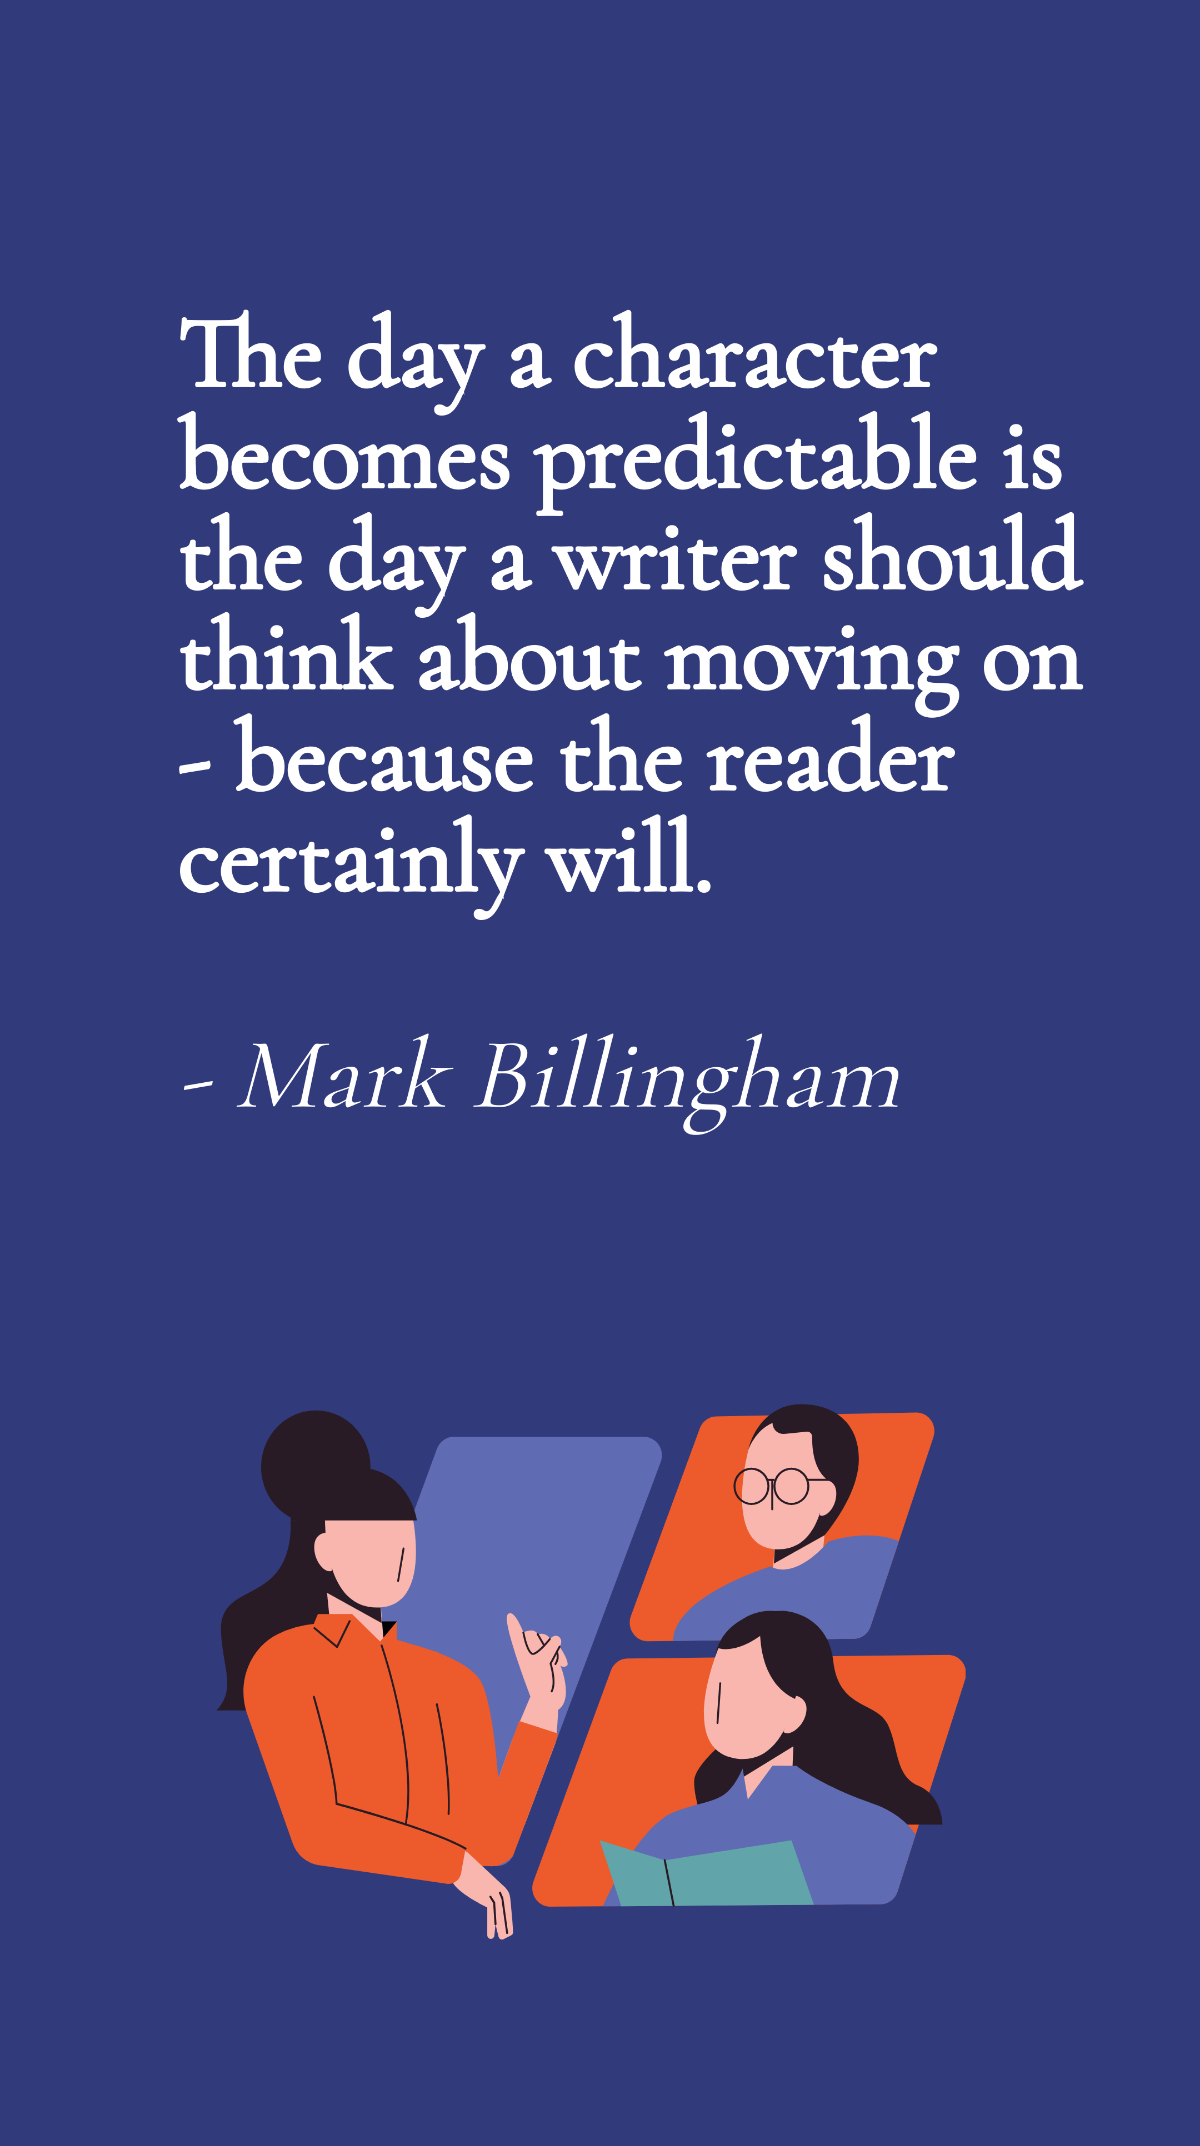 Mark Billingham - The day a character becomes predictable is the day a writer should think about moving on - because the reader certainly will. Template